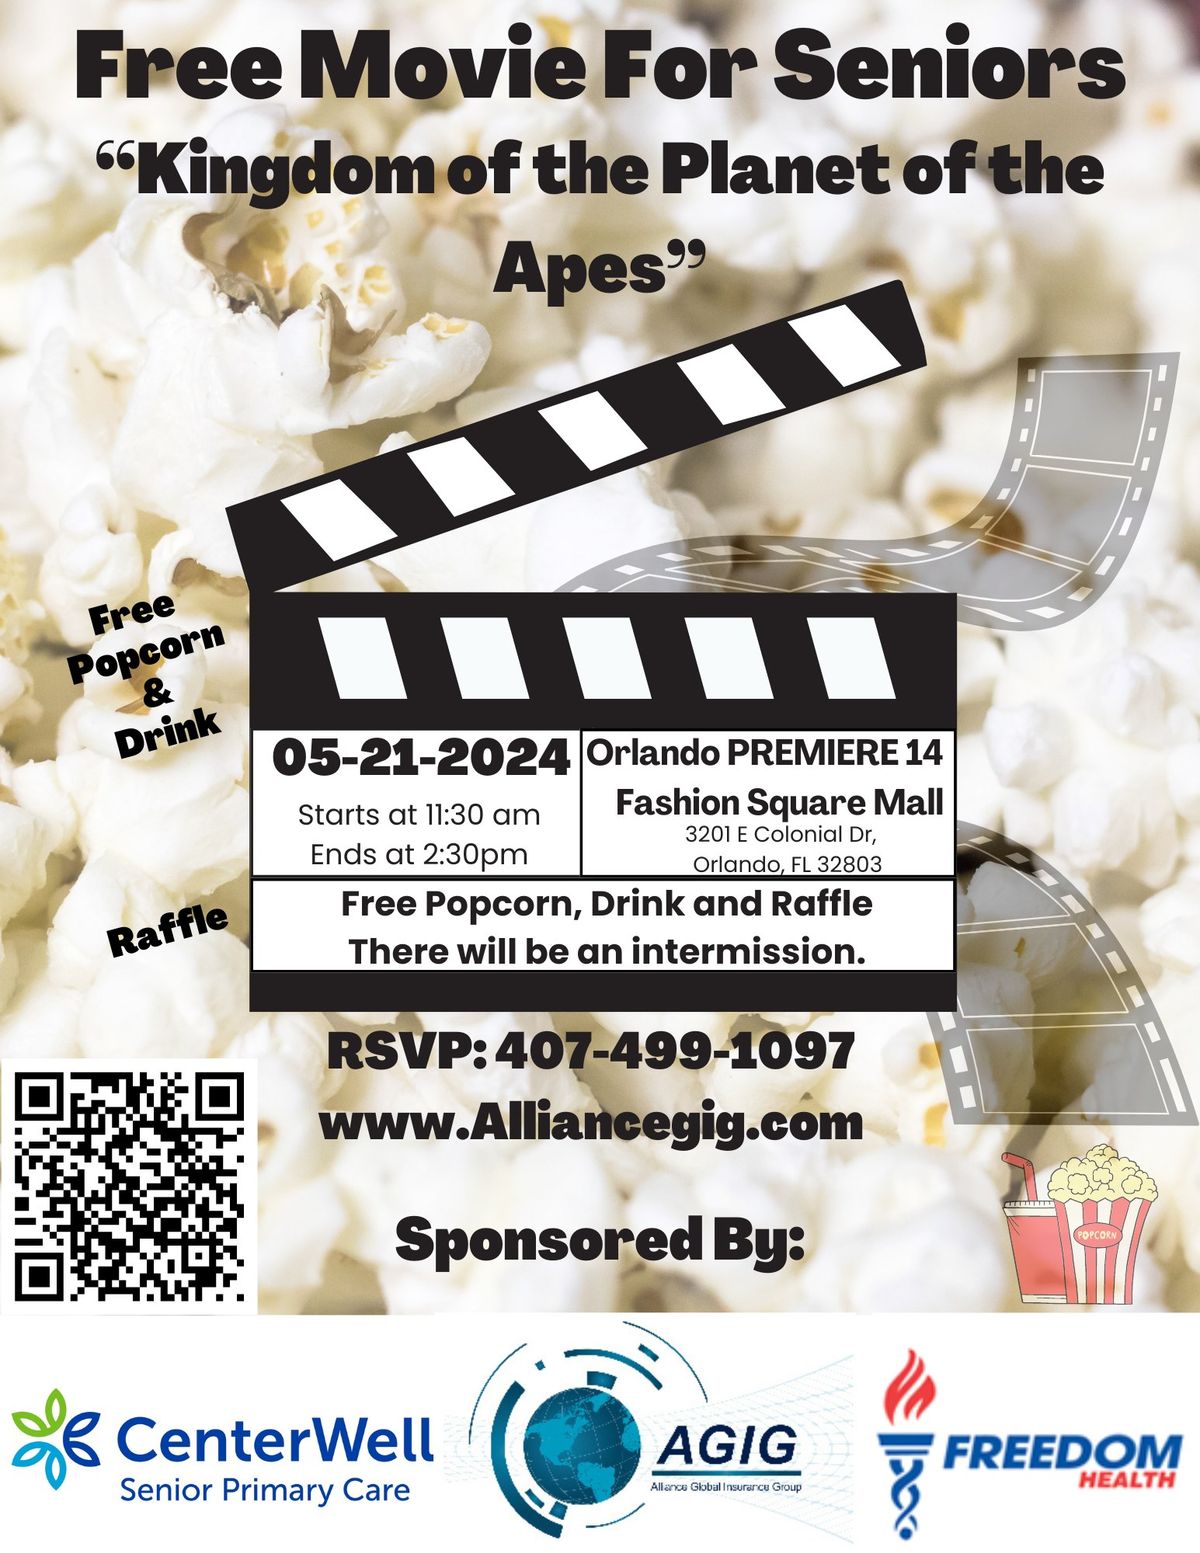 Free Movie For 55+ Seniors "Kingdom Of The Planet Of The Apes"